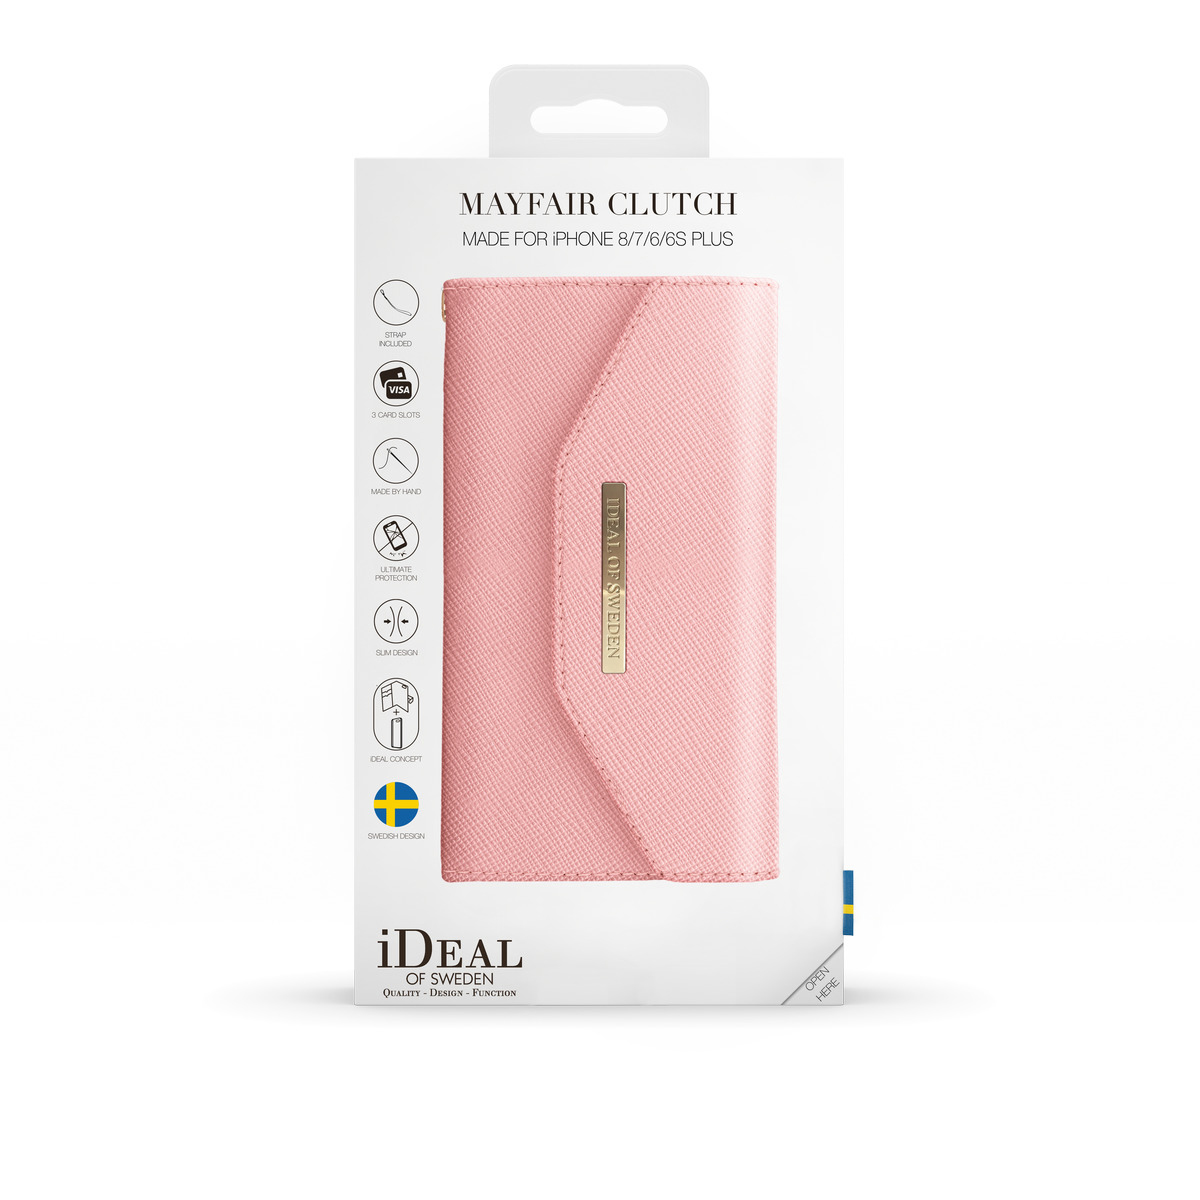 IDEAL OF SWEDEN Mayfair 6 Plus iPhone iPhone 7 Clutch, ,iPhone Plus, Rosa Plus, Apple, Bookcover, 8